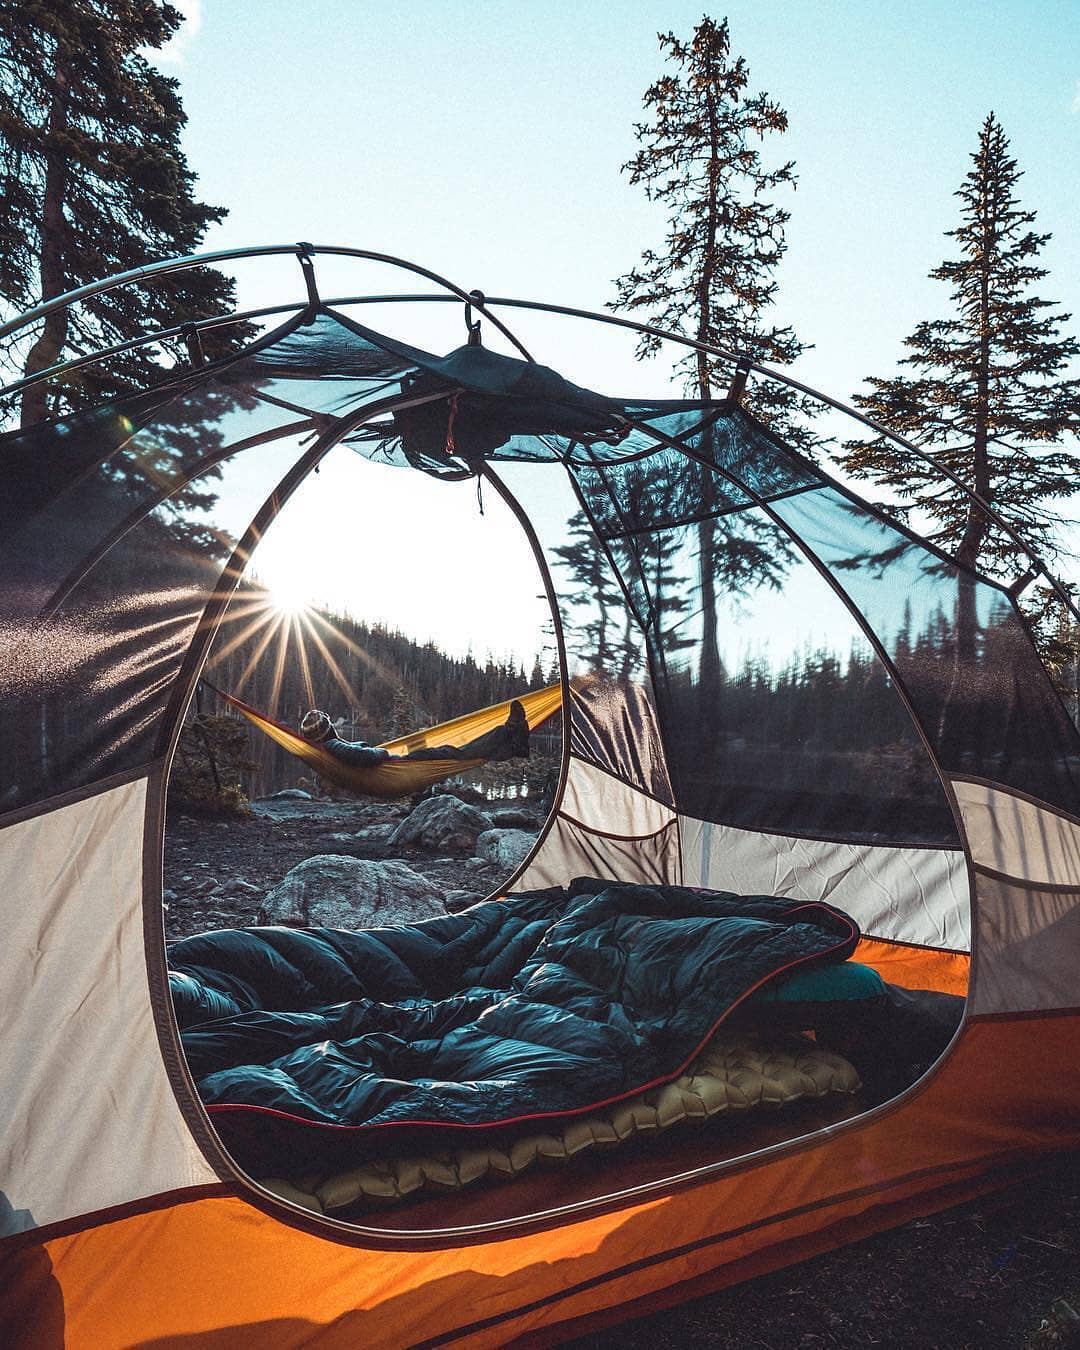 Man in a Hammock While Camping in the Mountains. Photo by Instagram user @campingtravellers